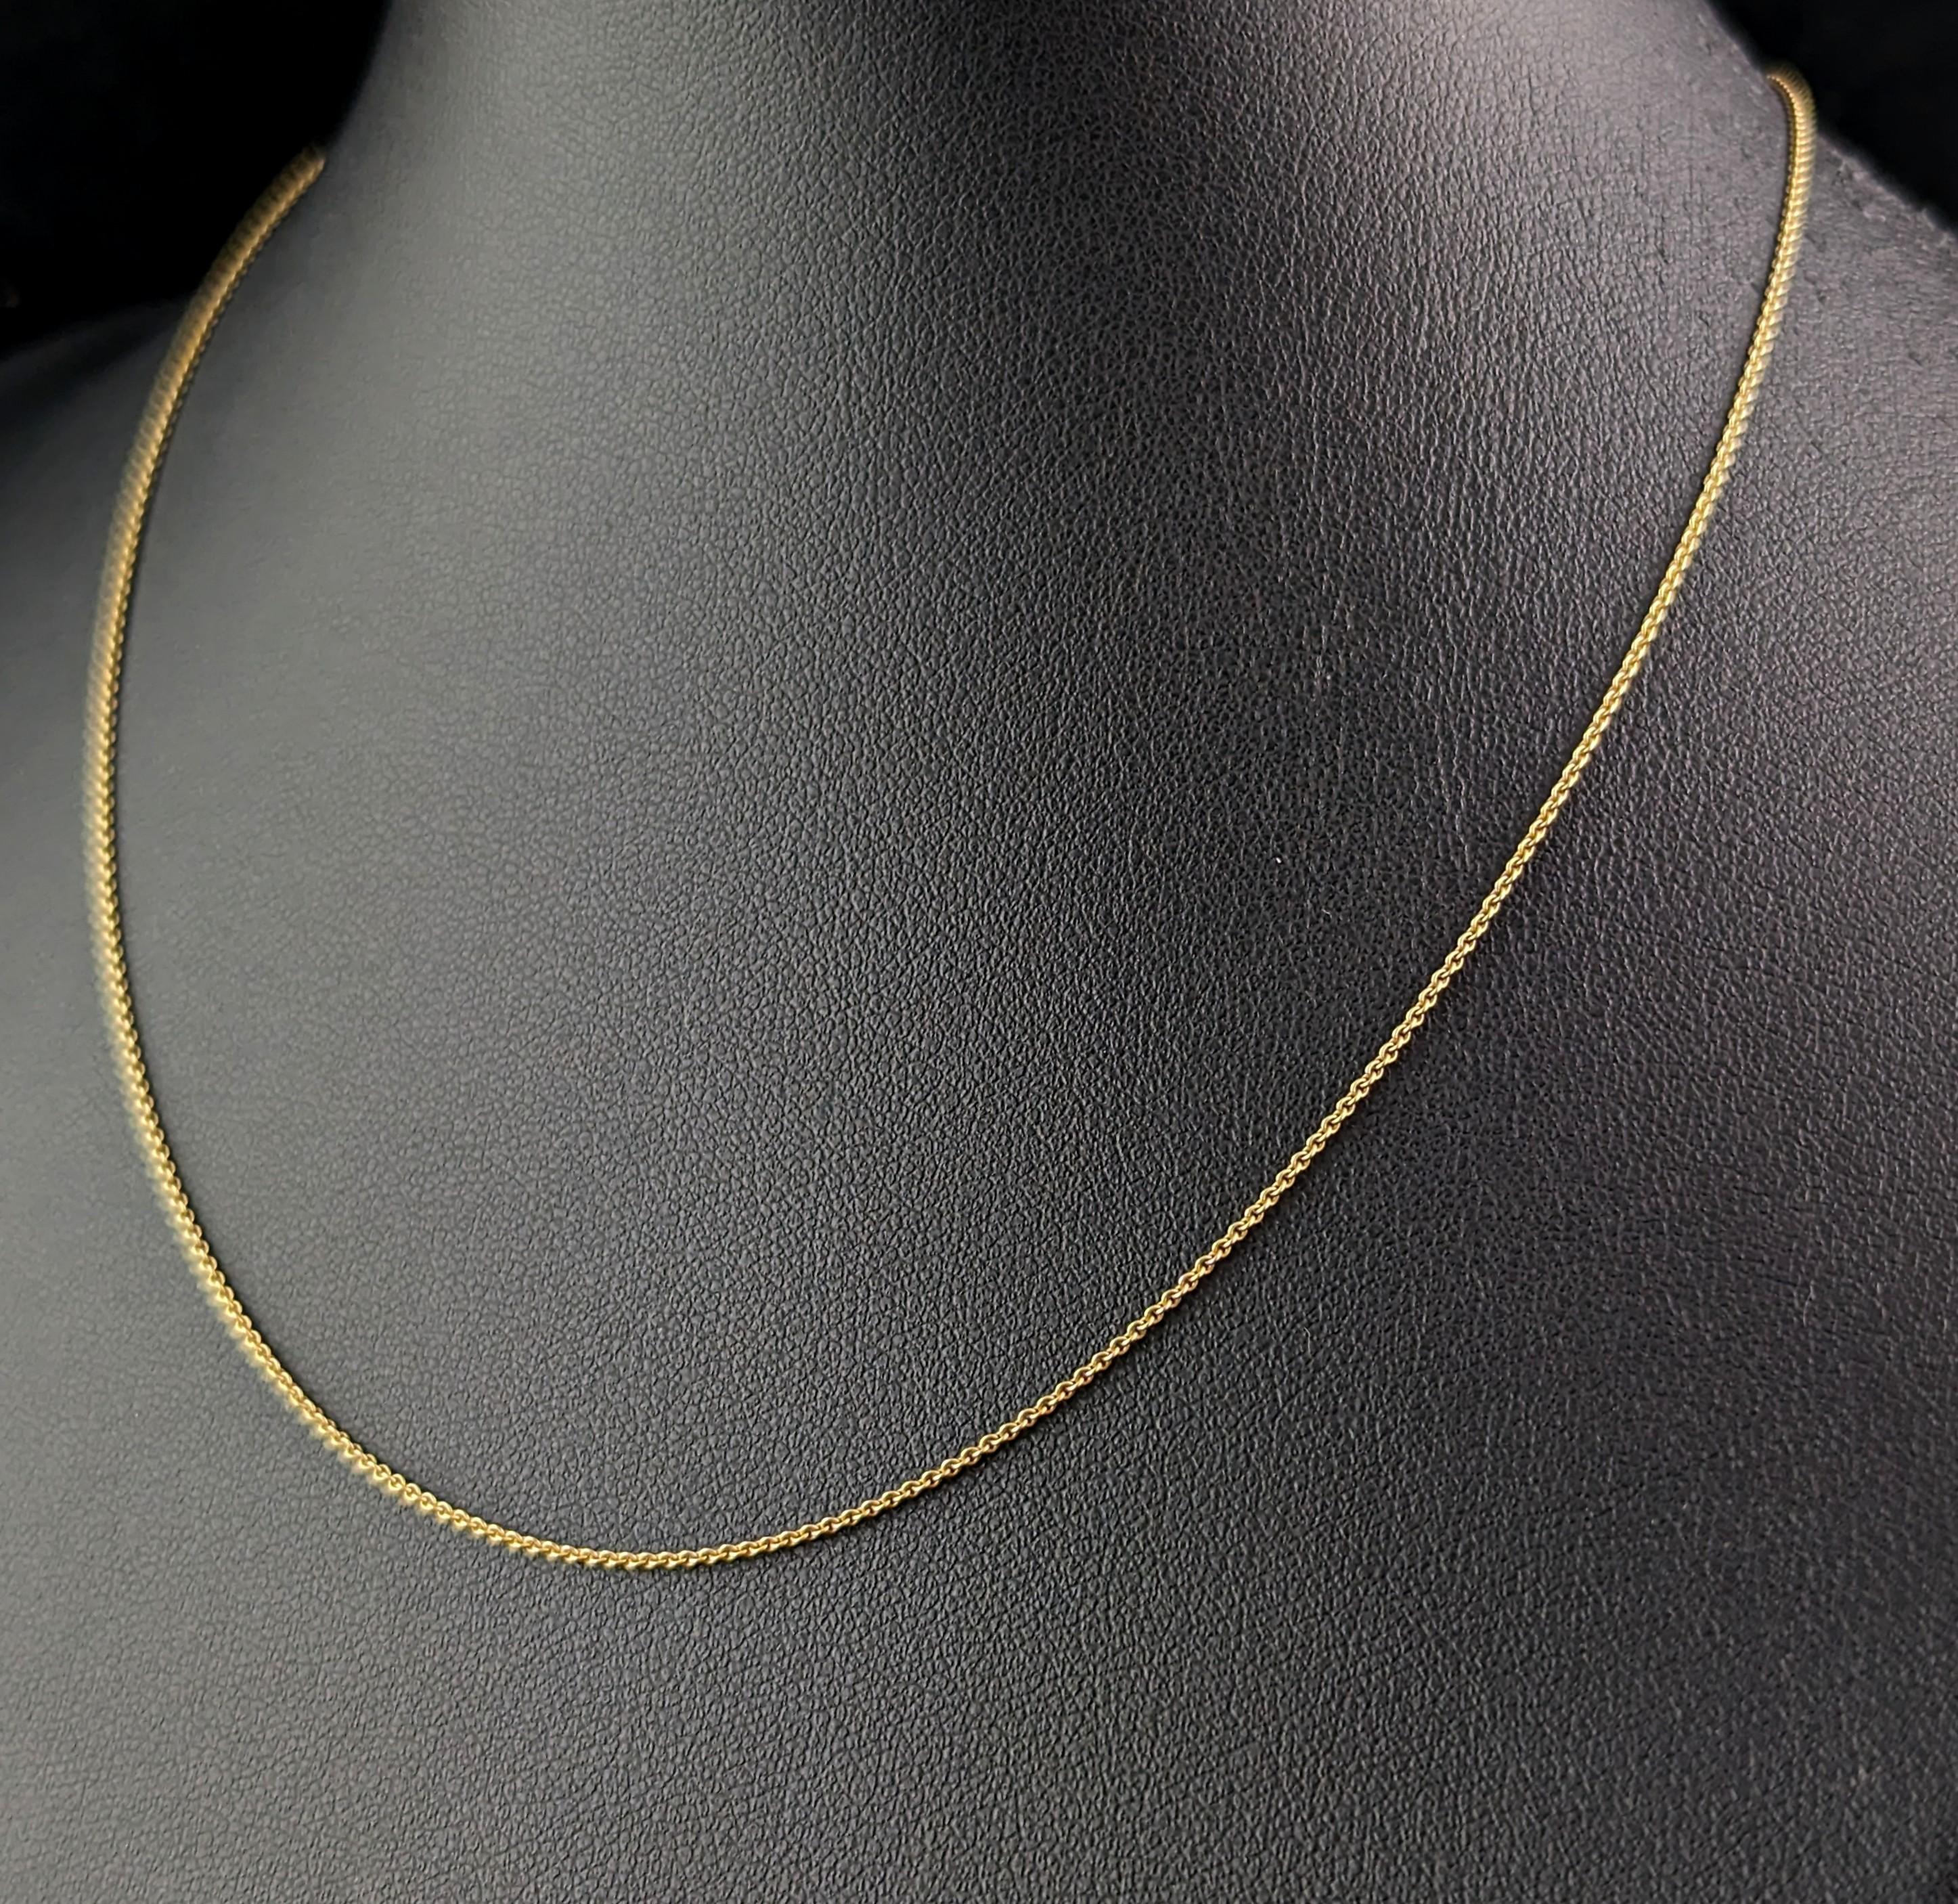 Antique 15k gold trace link chain necklace, dainty, Edwardian  For Sale 4